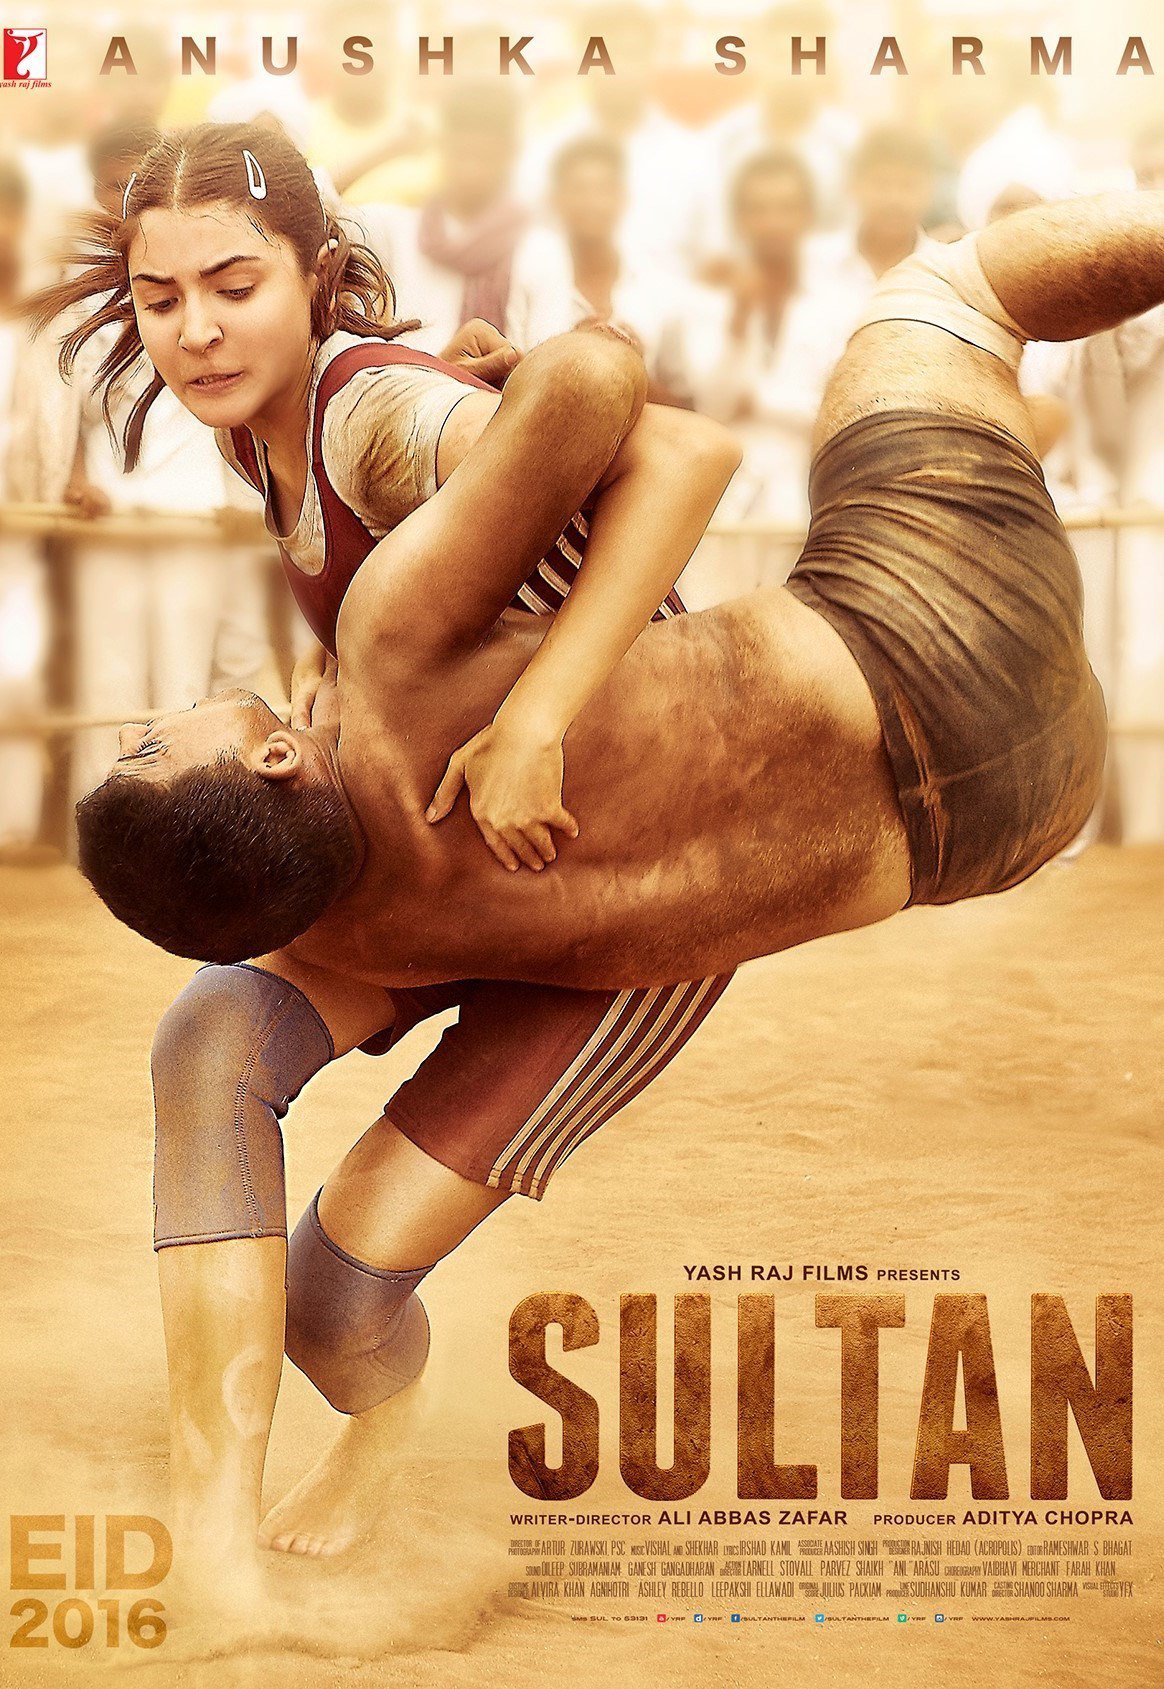 Poster for the movie "Sultan"